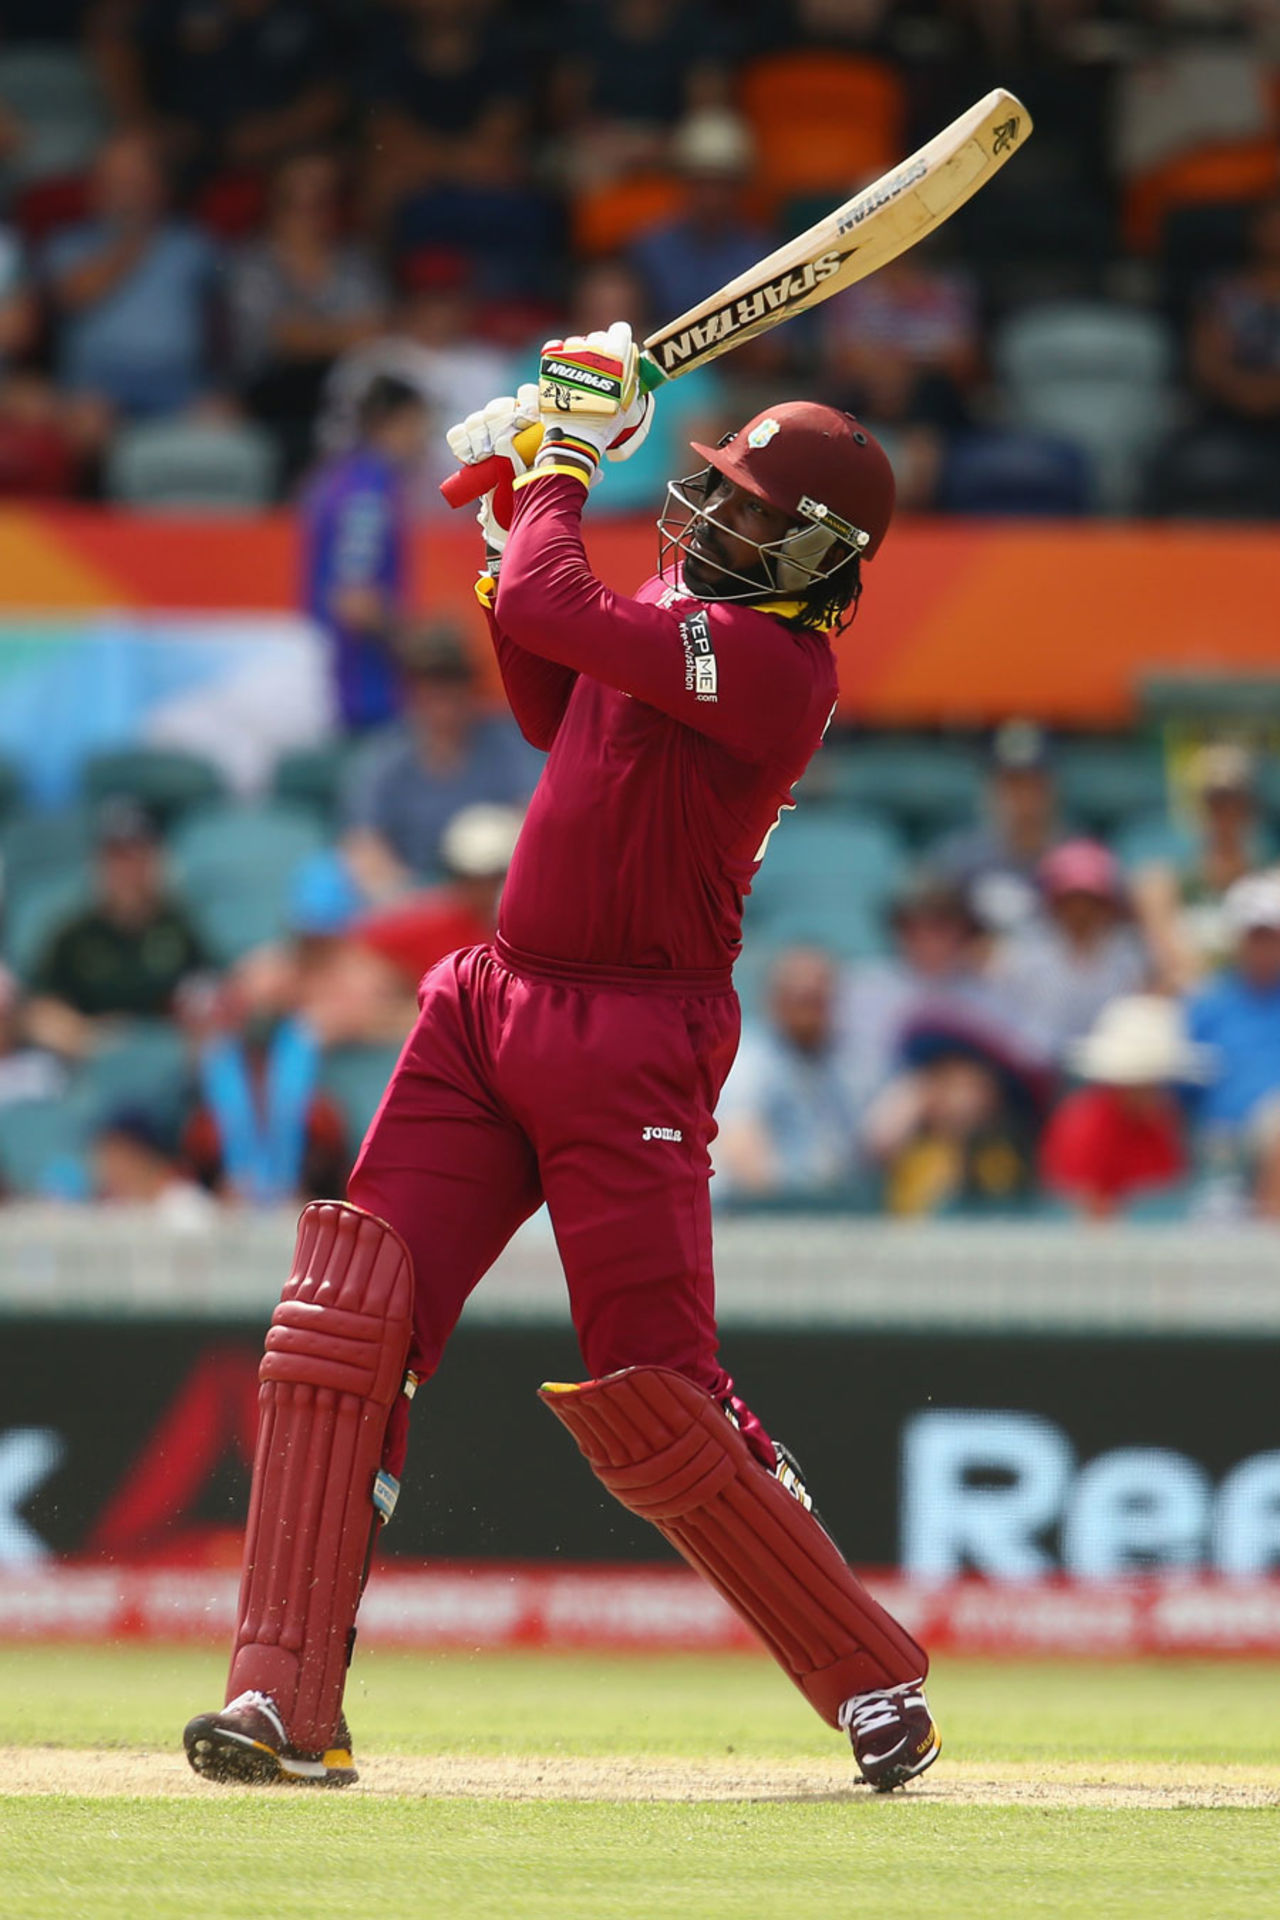 Chris Gayle takes the aerial route, West Indies v Zimbabwe, World Cup 2015, Group B, Canberra, February 24, 2015